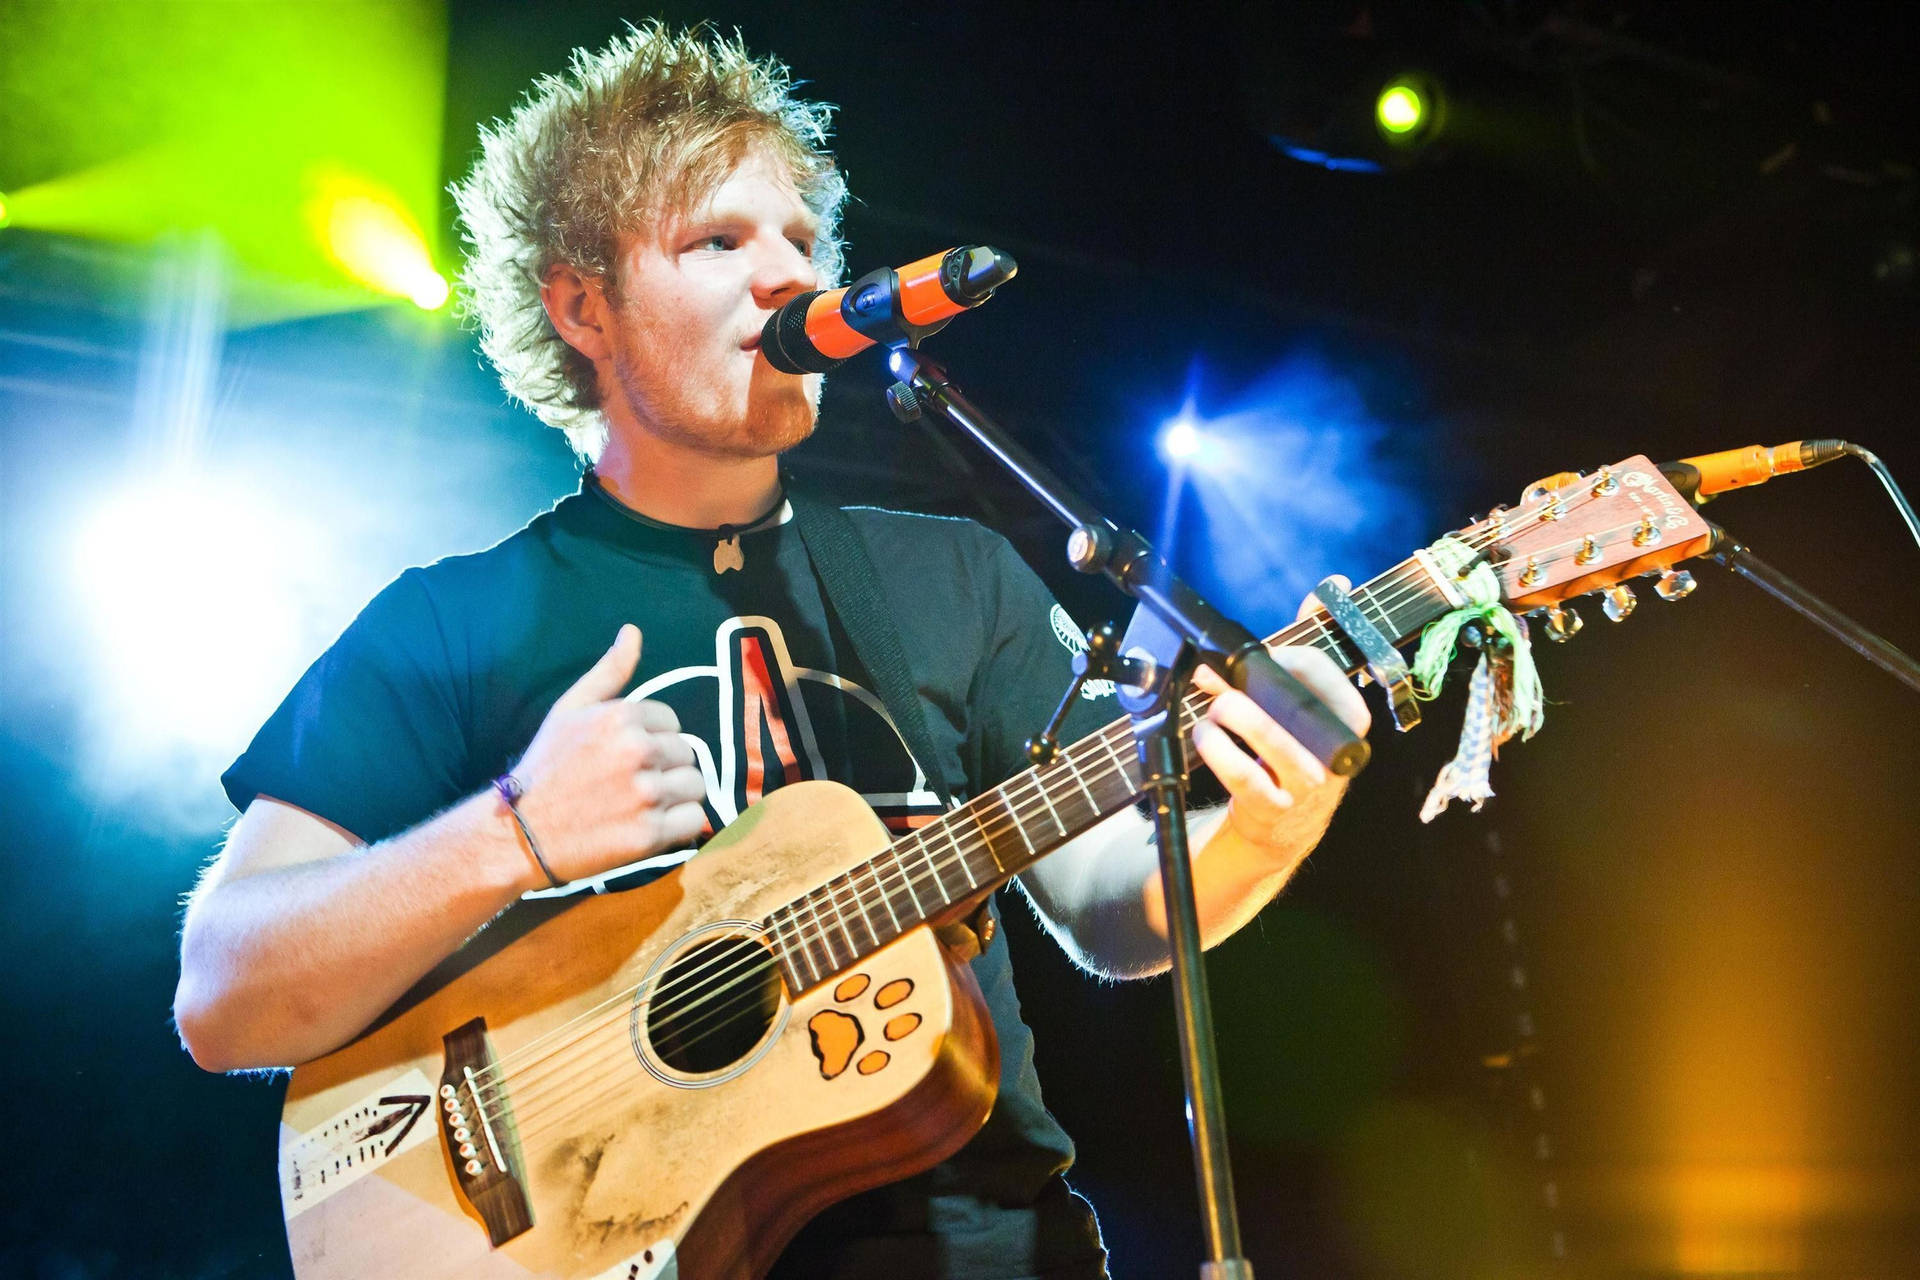 Ed Sheeran performing live on stage Wallpaper